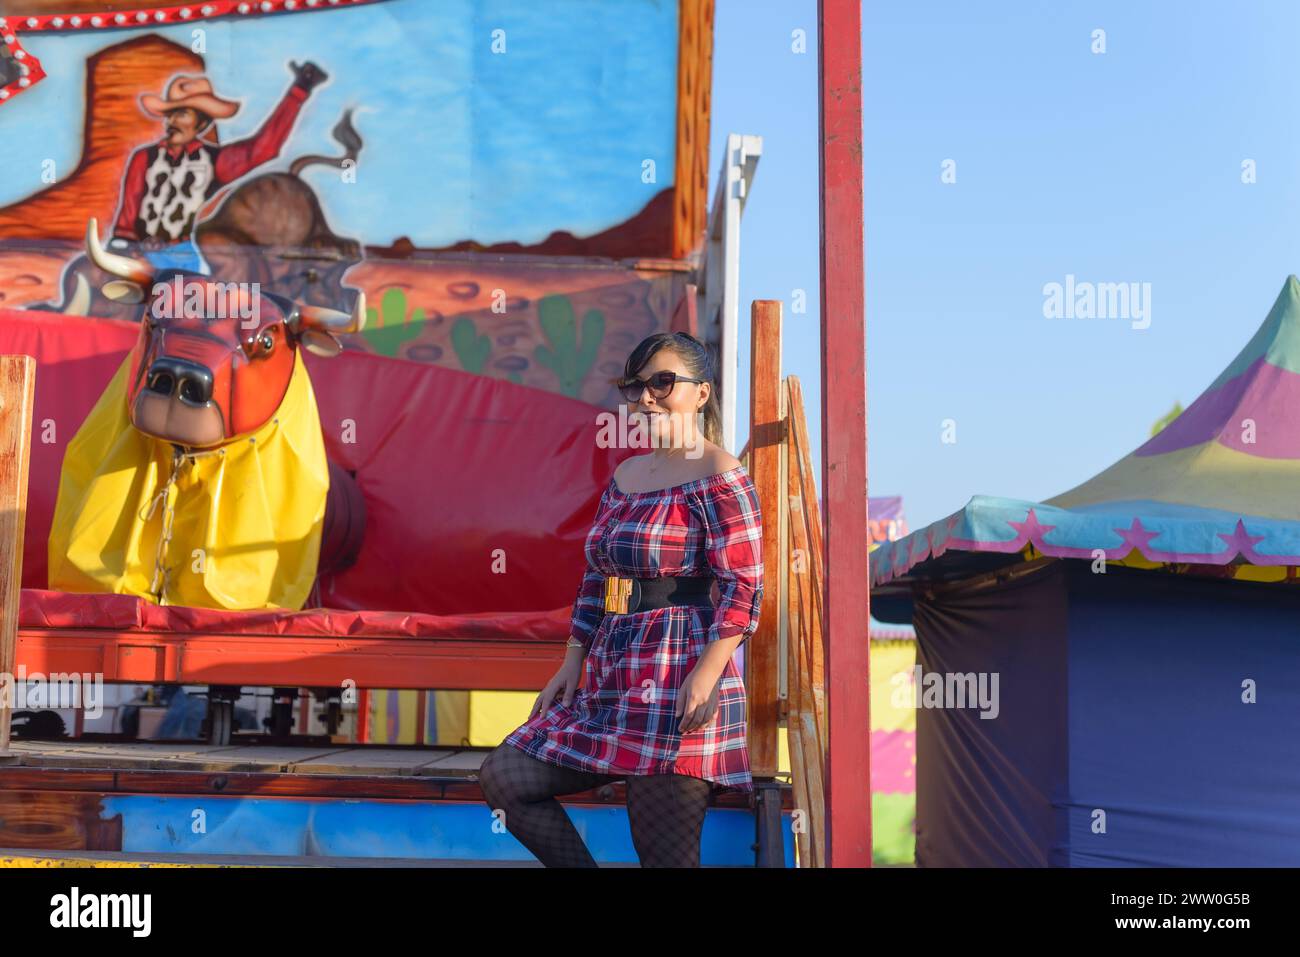 Portrait of a woman next to a mechanical bull at a fair in Mexico. Stock Photo